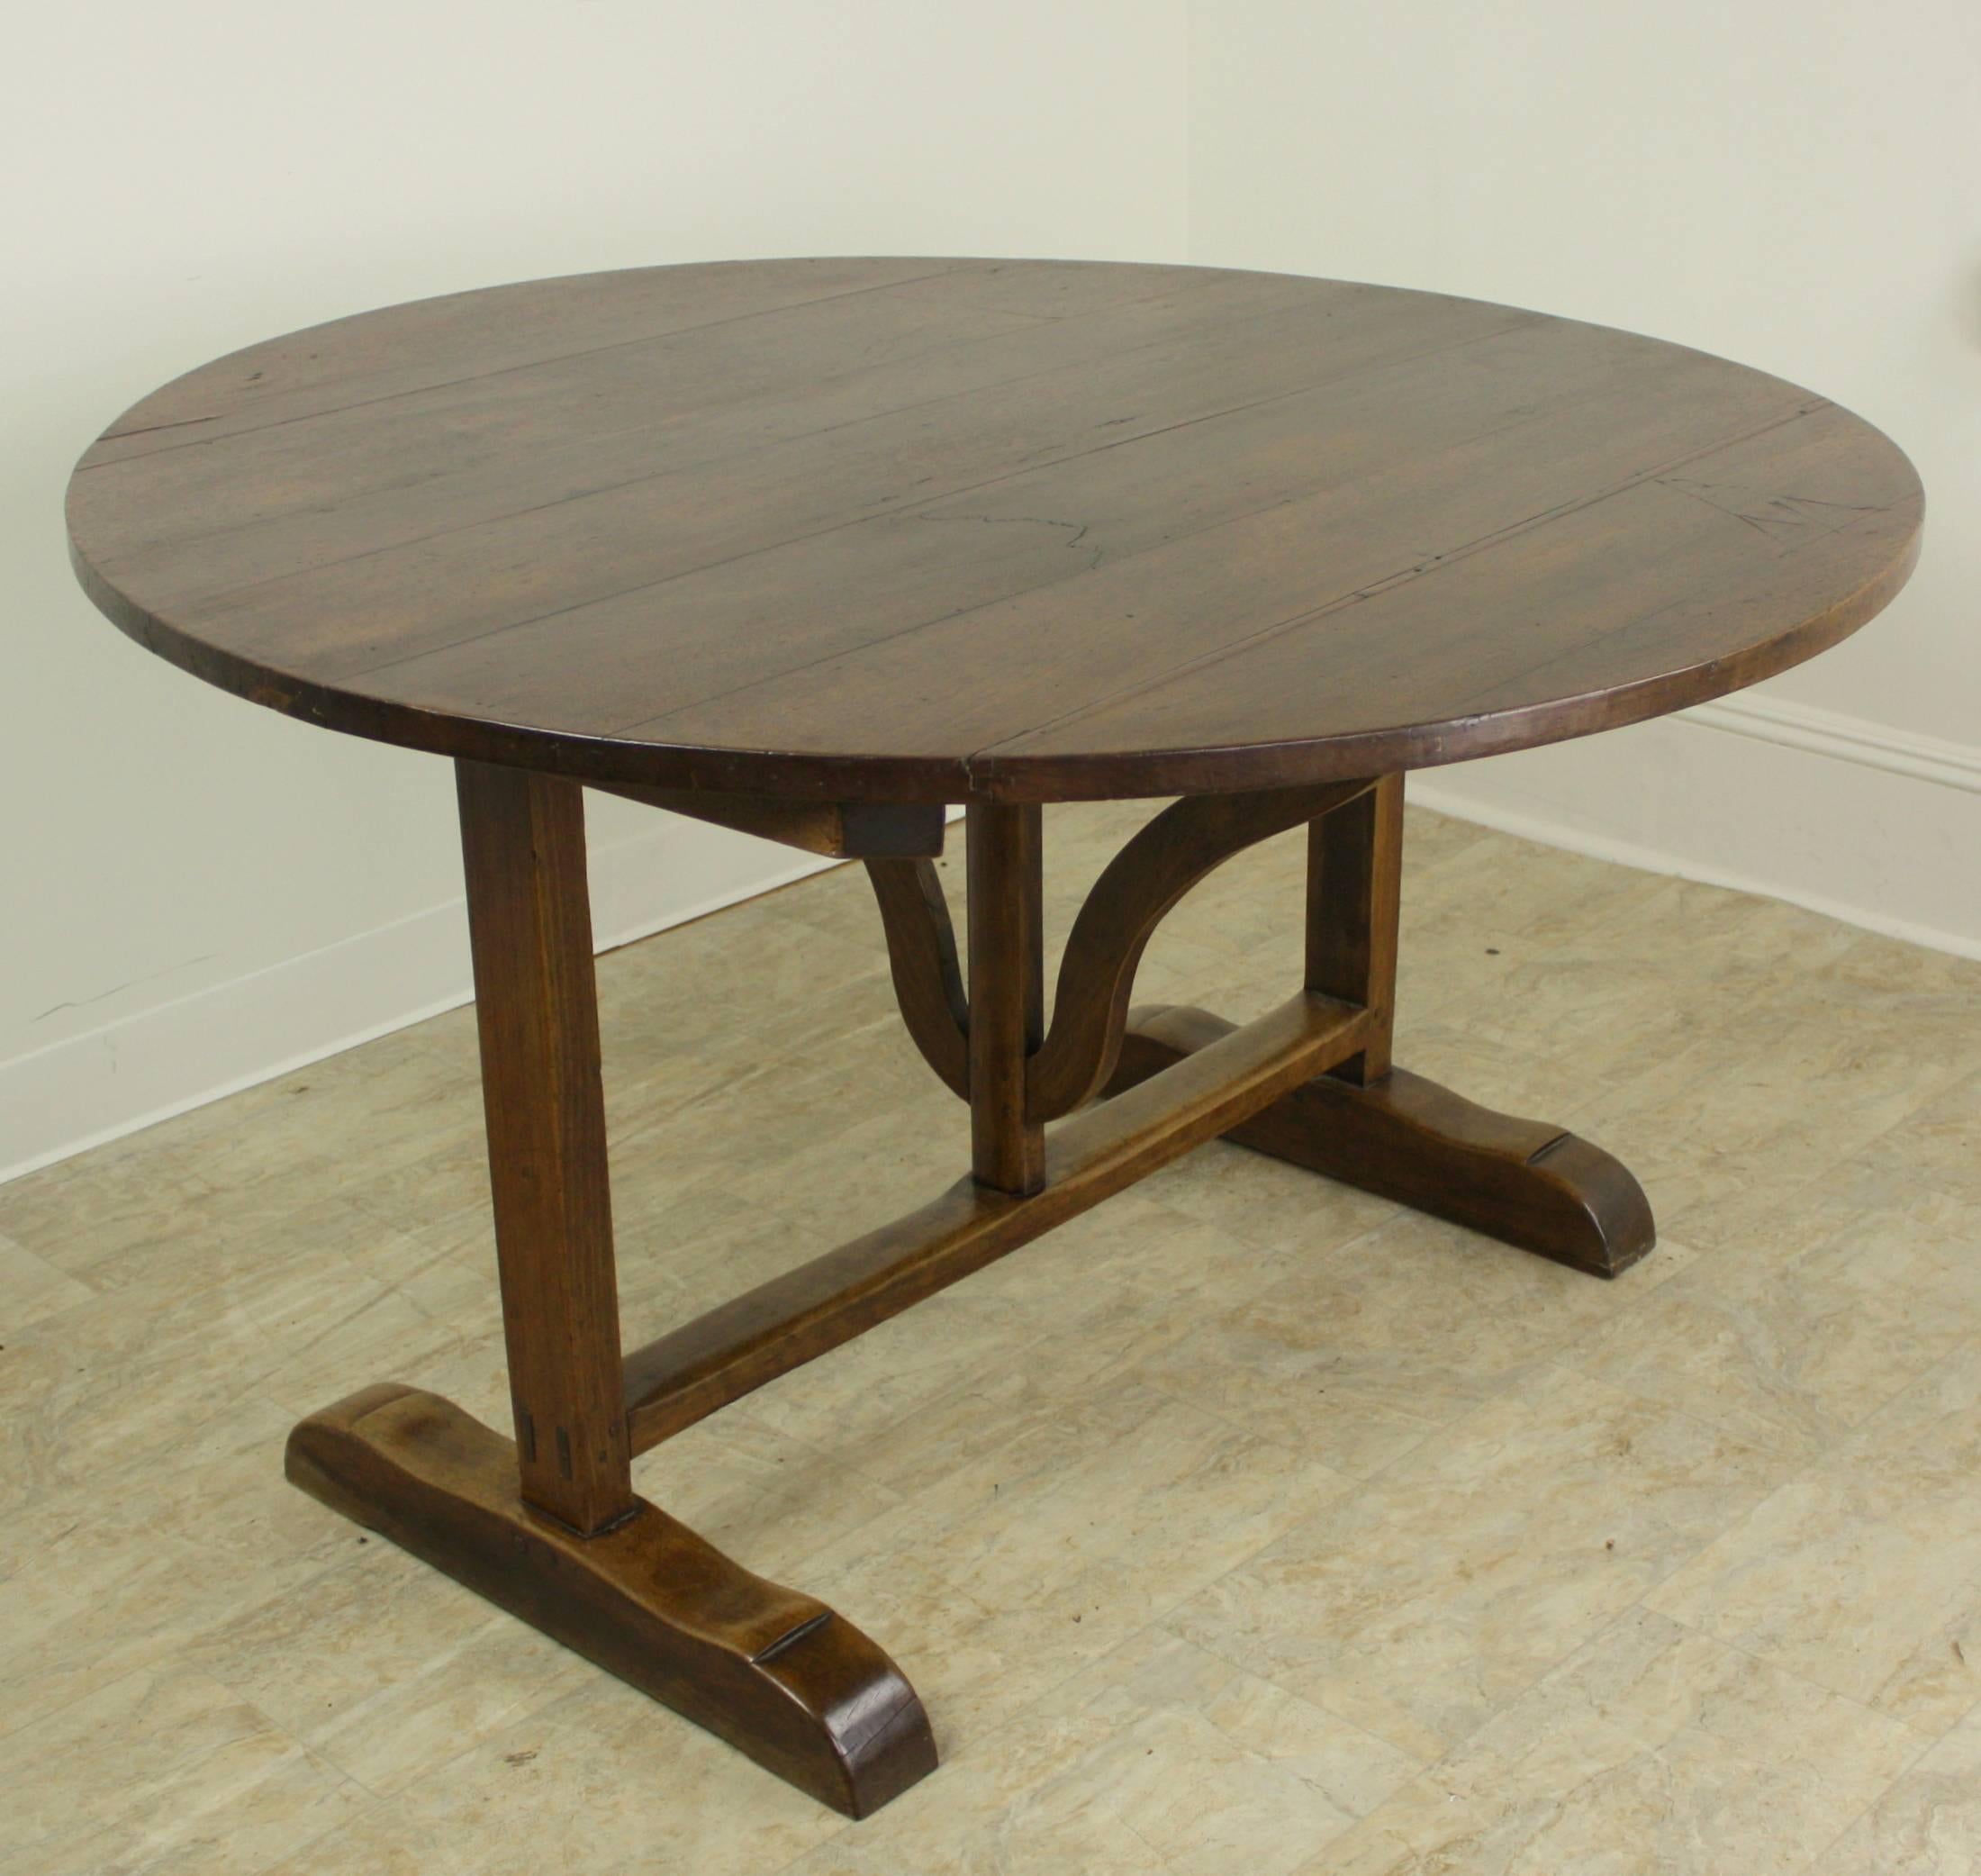 The walnut on this very good vendange wine tasting table is quite pretty. The thick top has a nice patinated edge. The decorative swivel table base is easy to use and is sturdy. The table can be stored upright if required, but would be a great